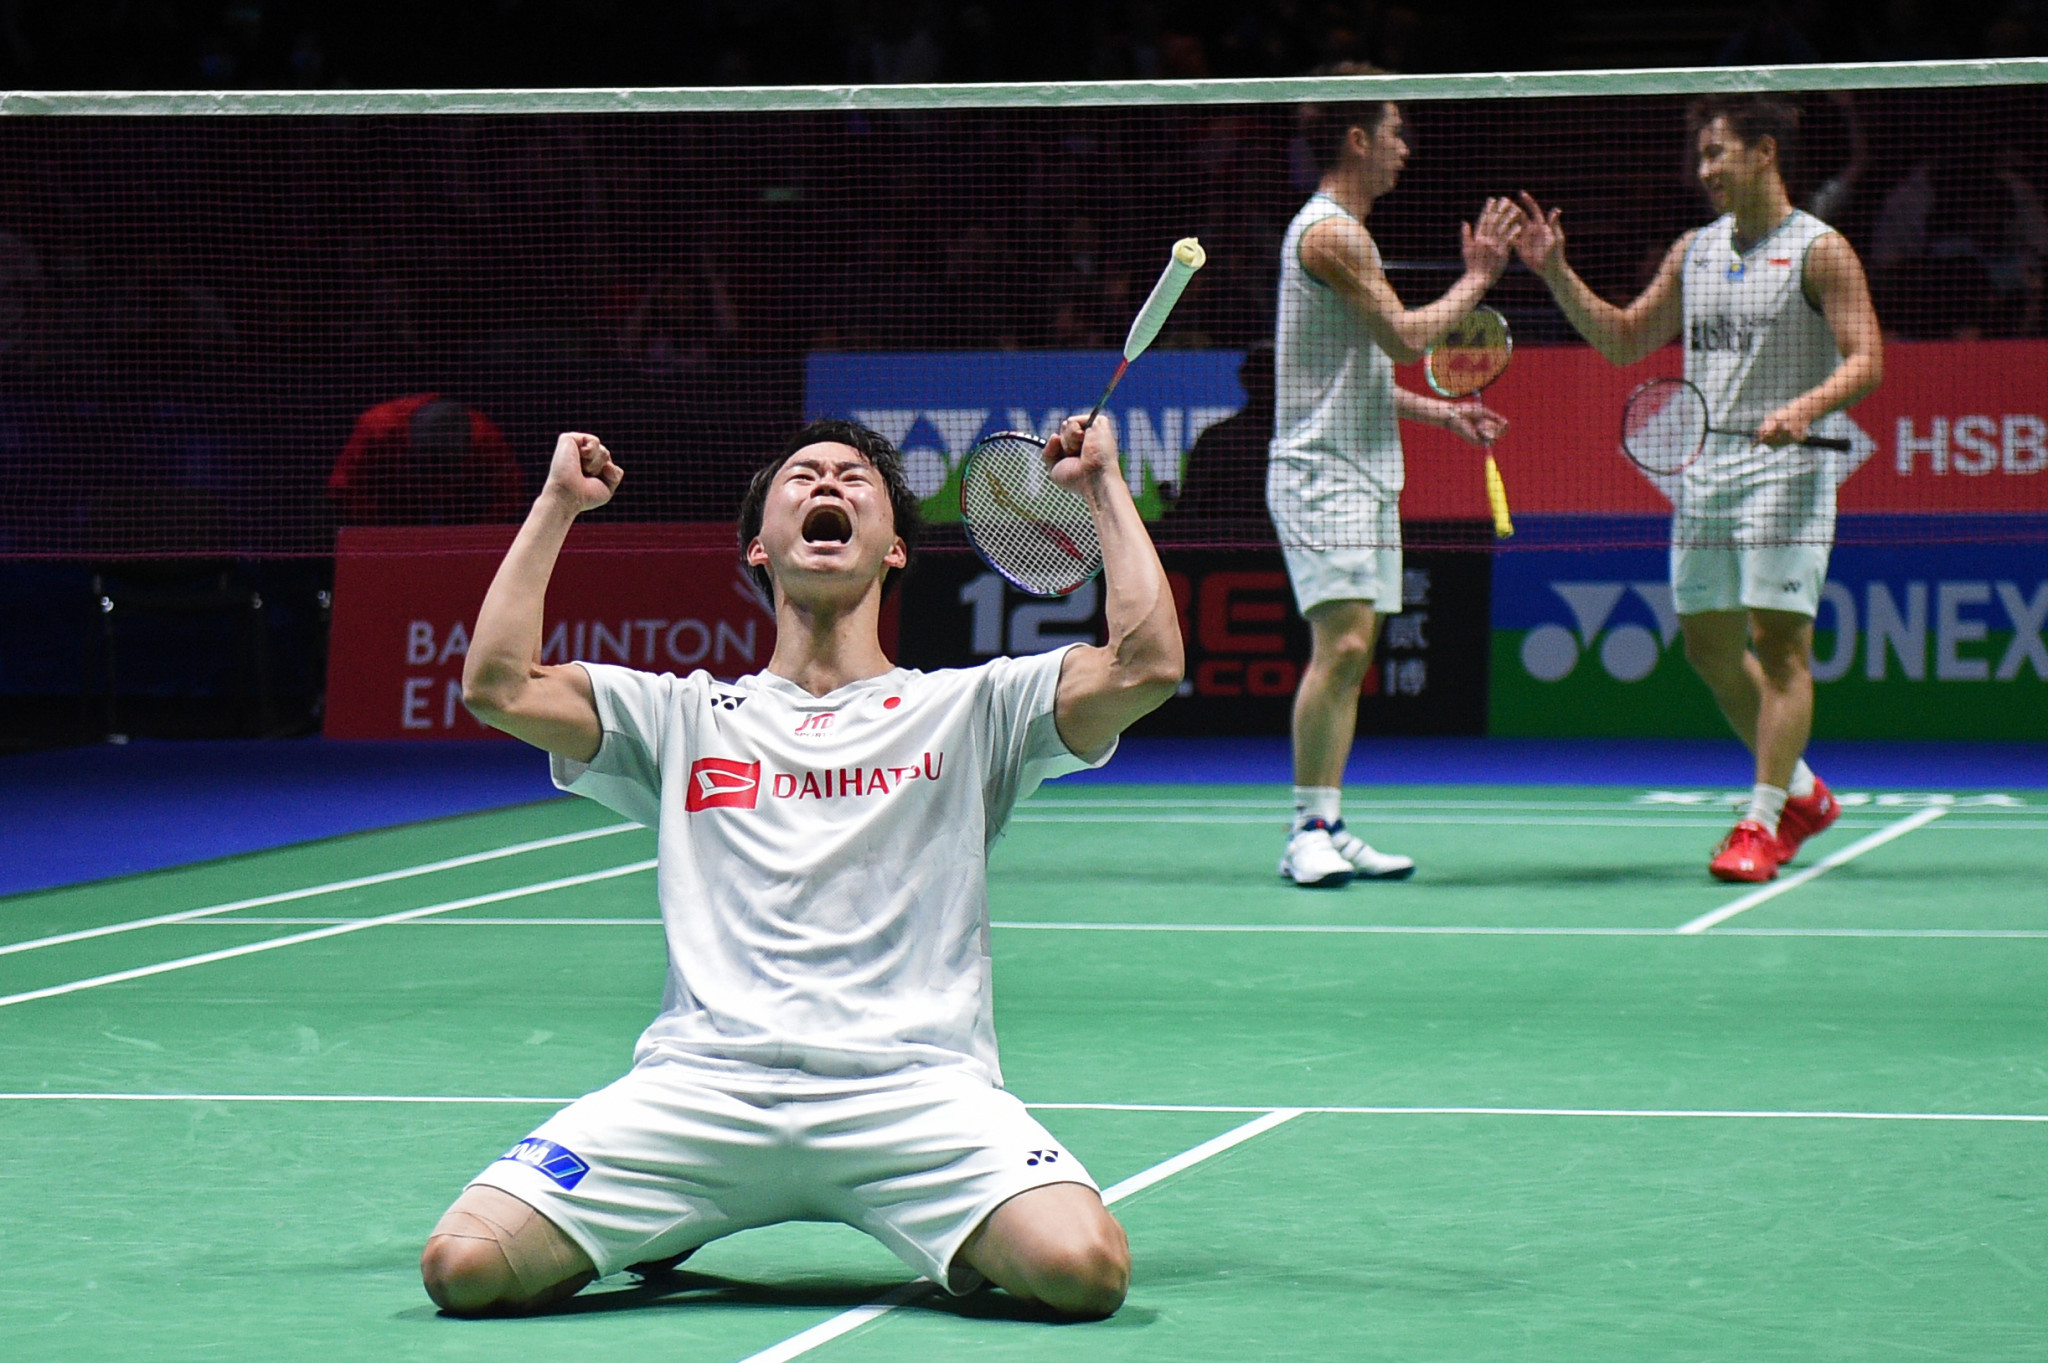 The BWF have responded to criticism from players following the All England Badminton Championships ©Getty Images